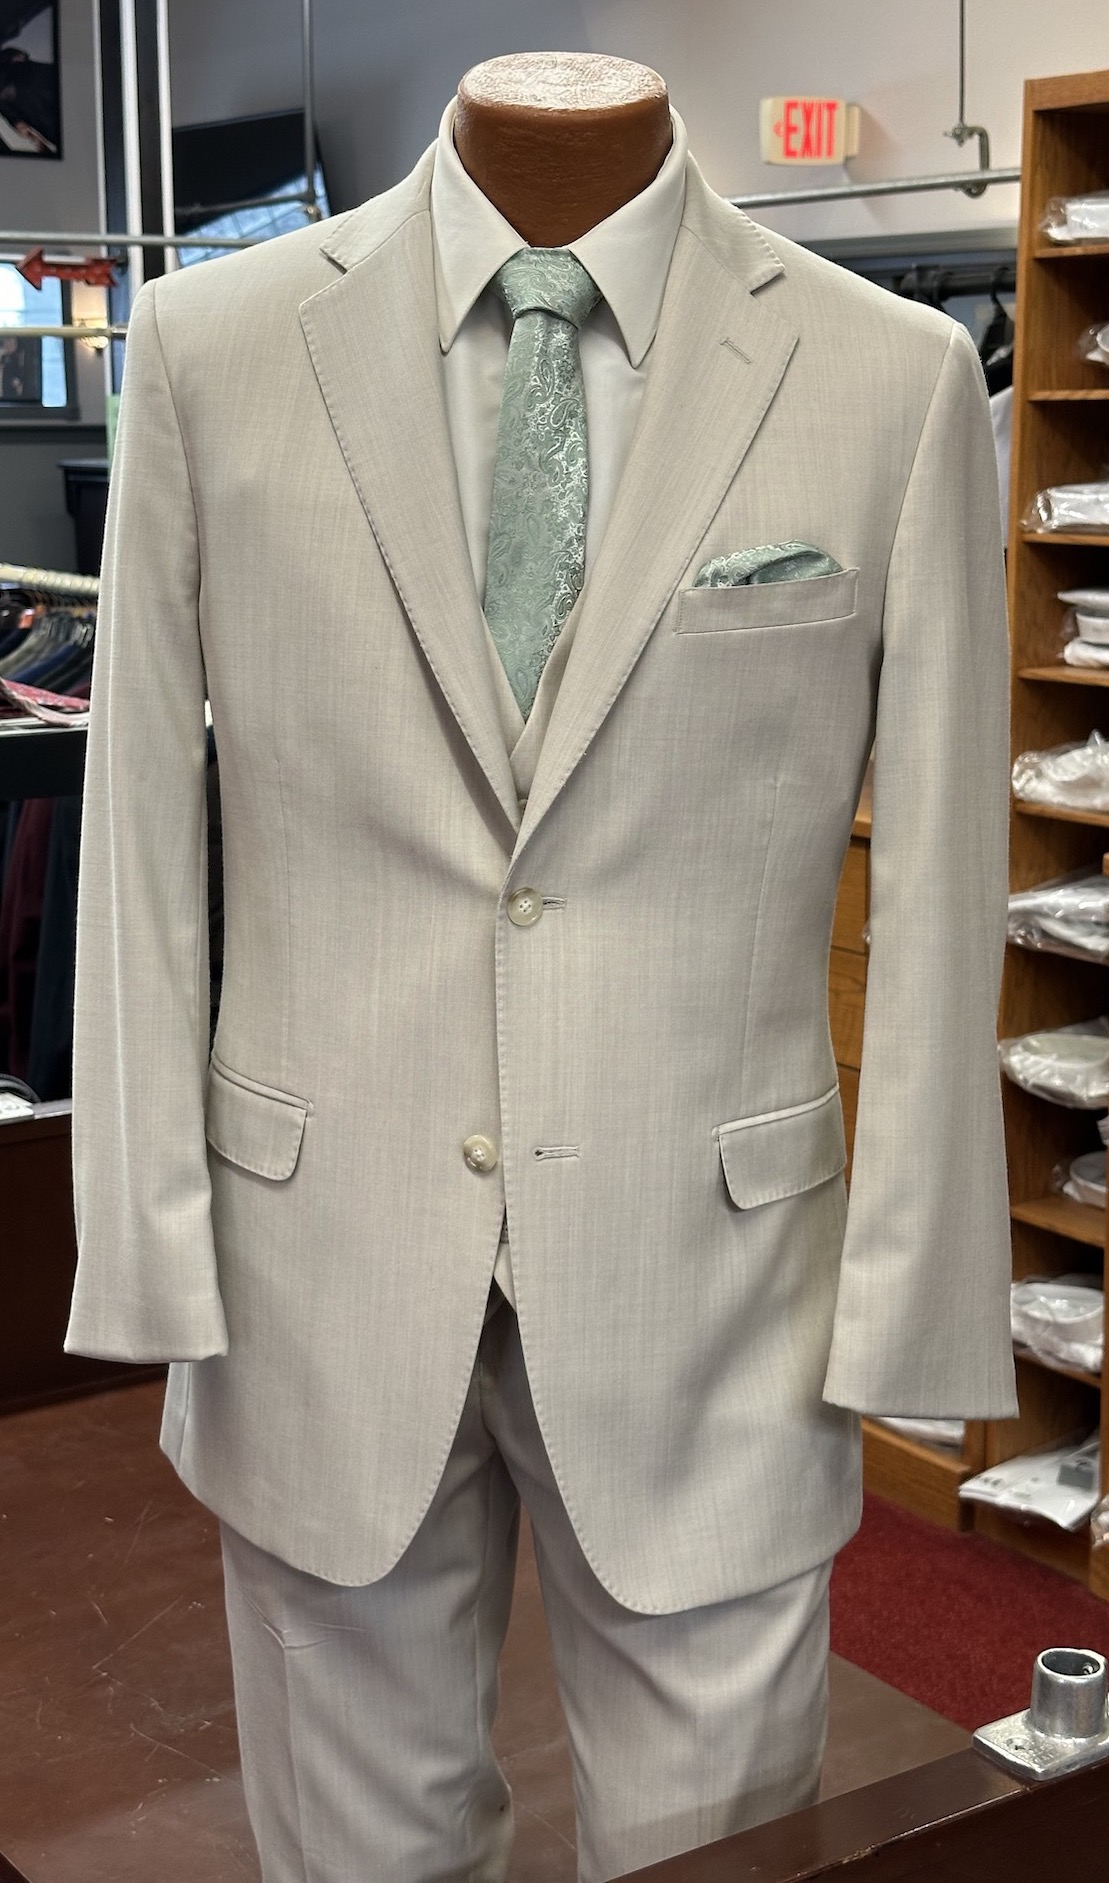 tan suit with light green tie and handkerchief